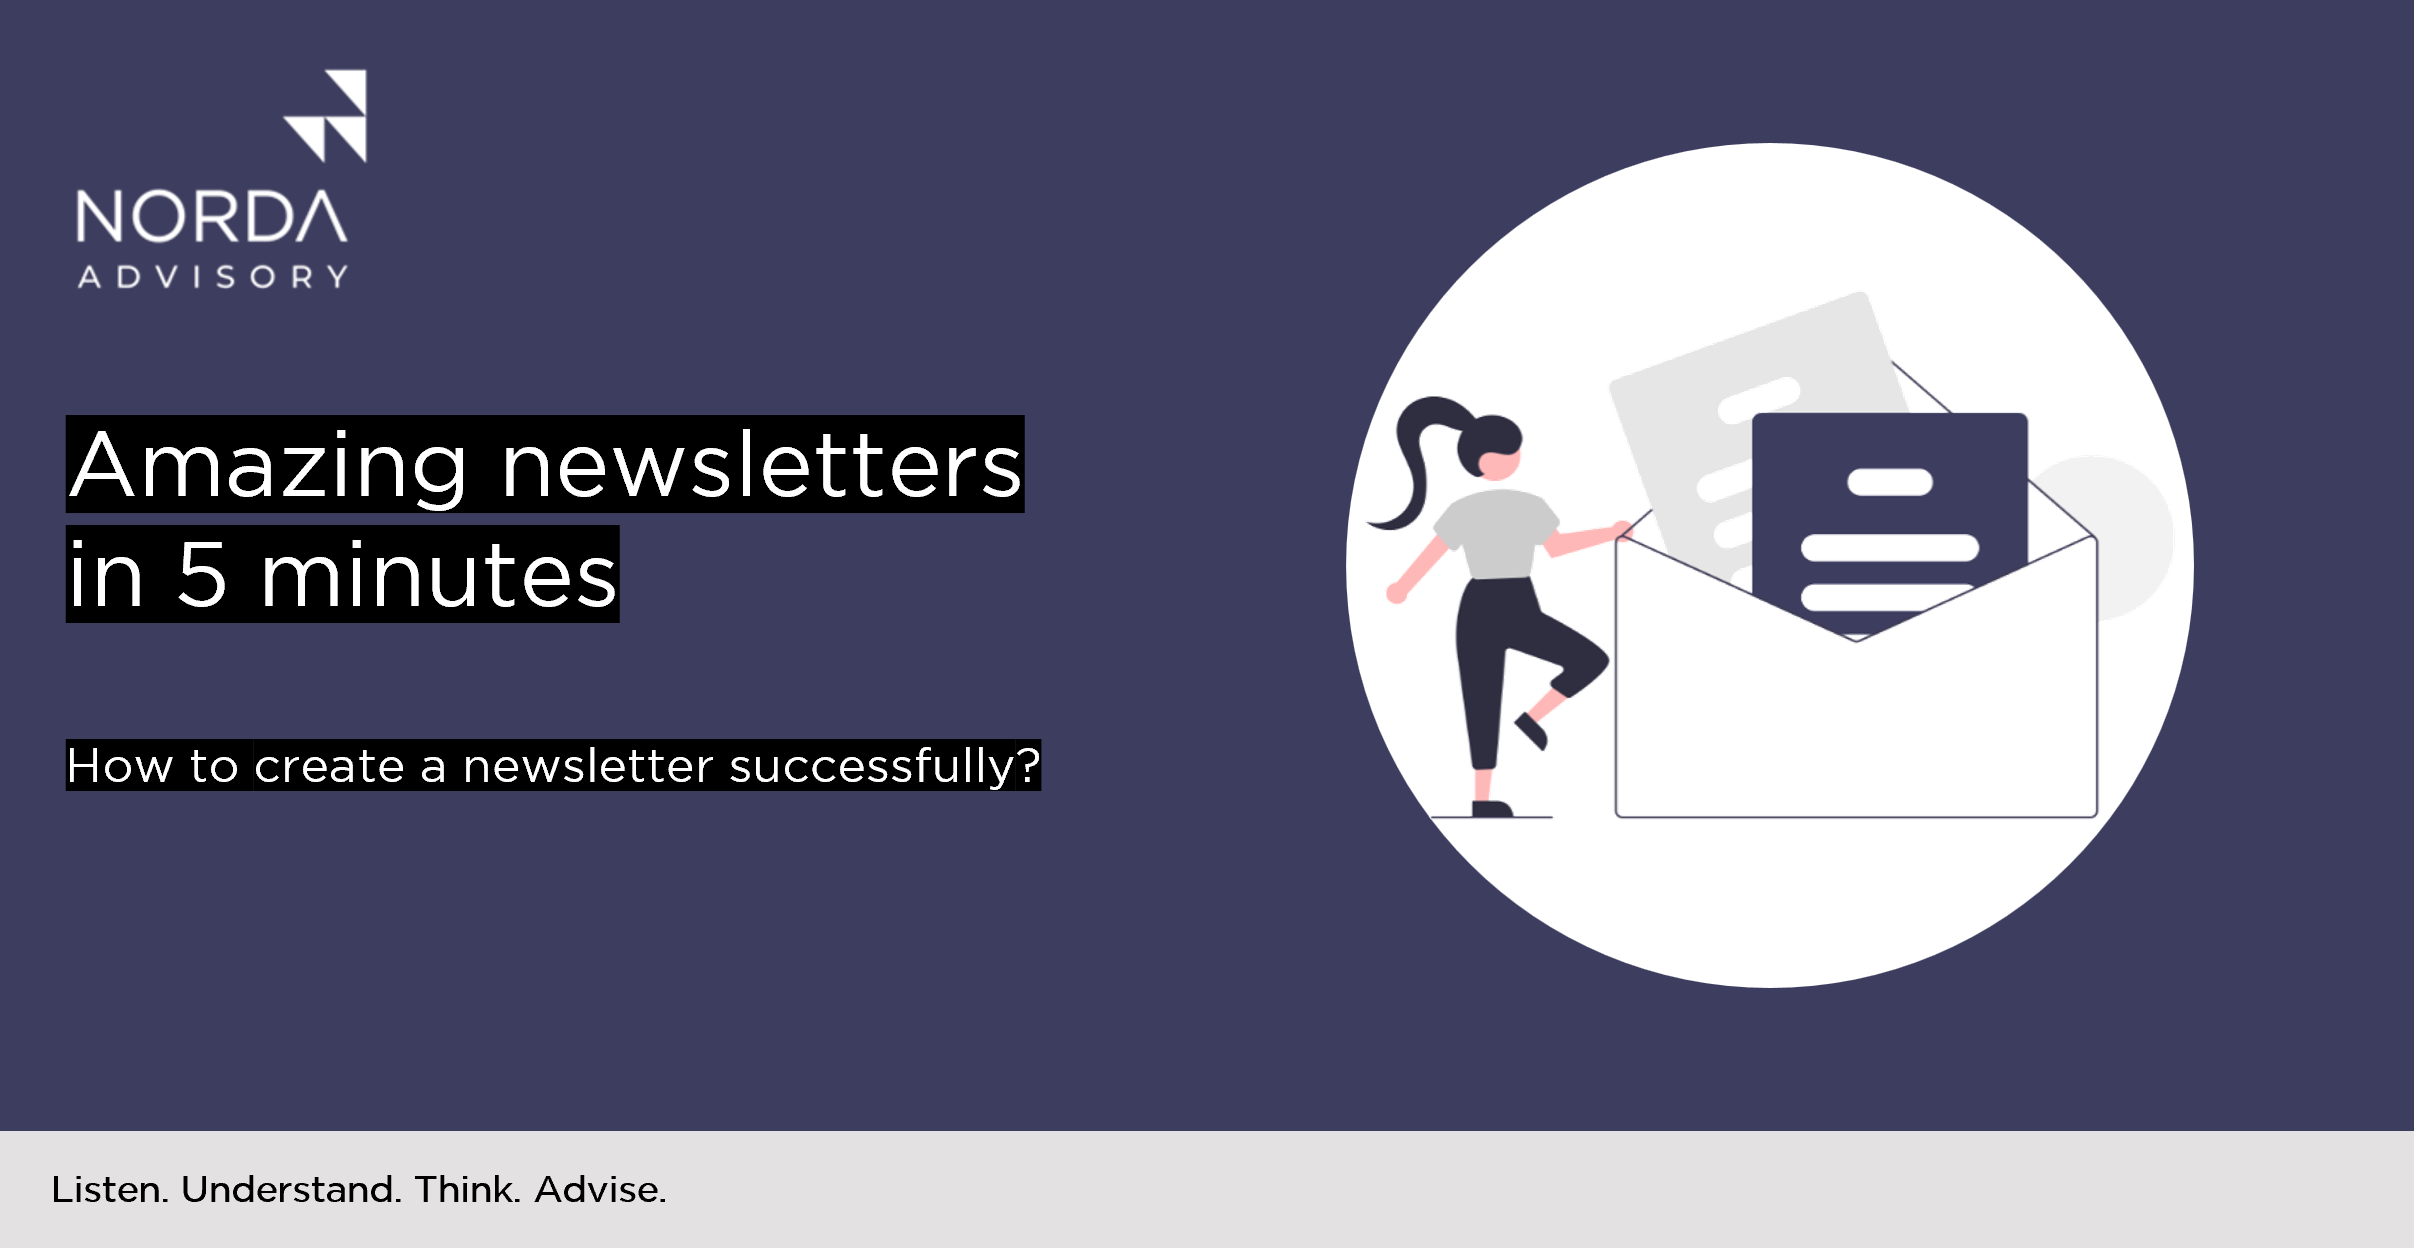 Amazing newsletters in 5 minutes